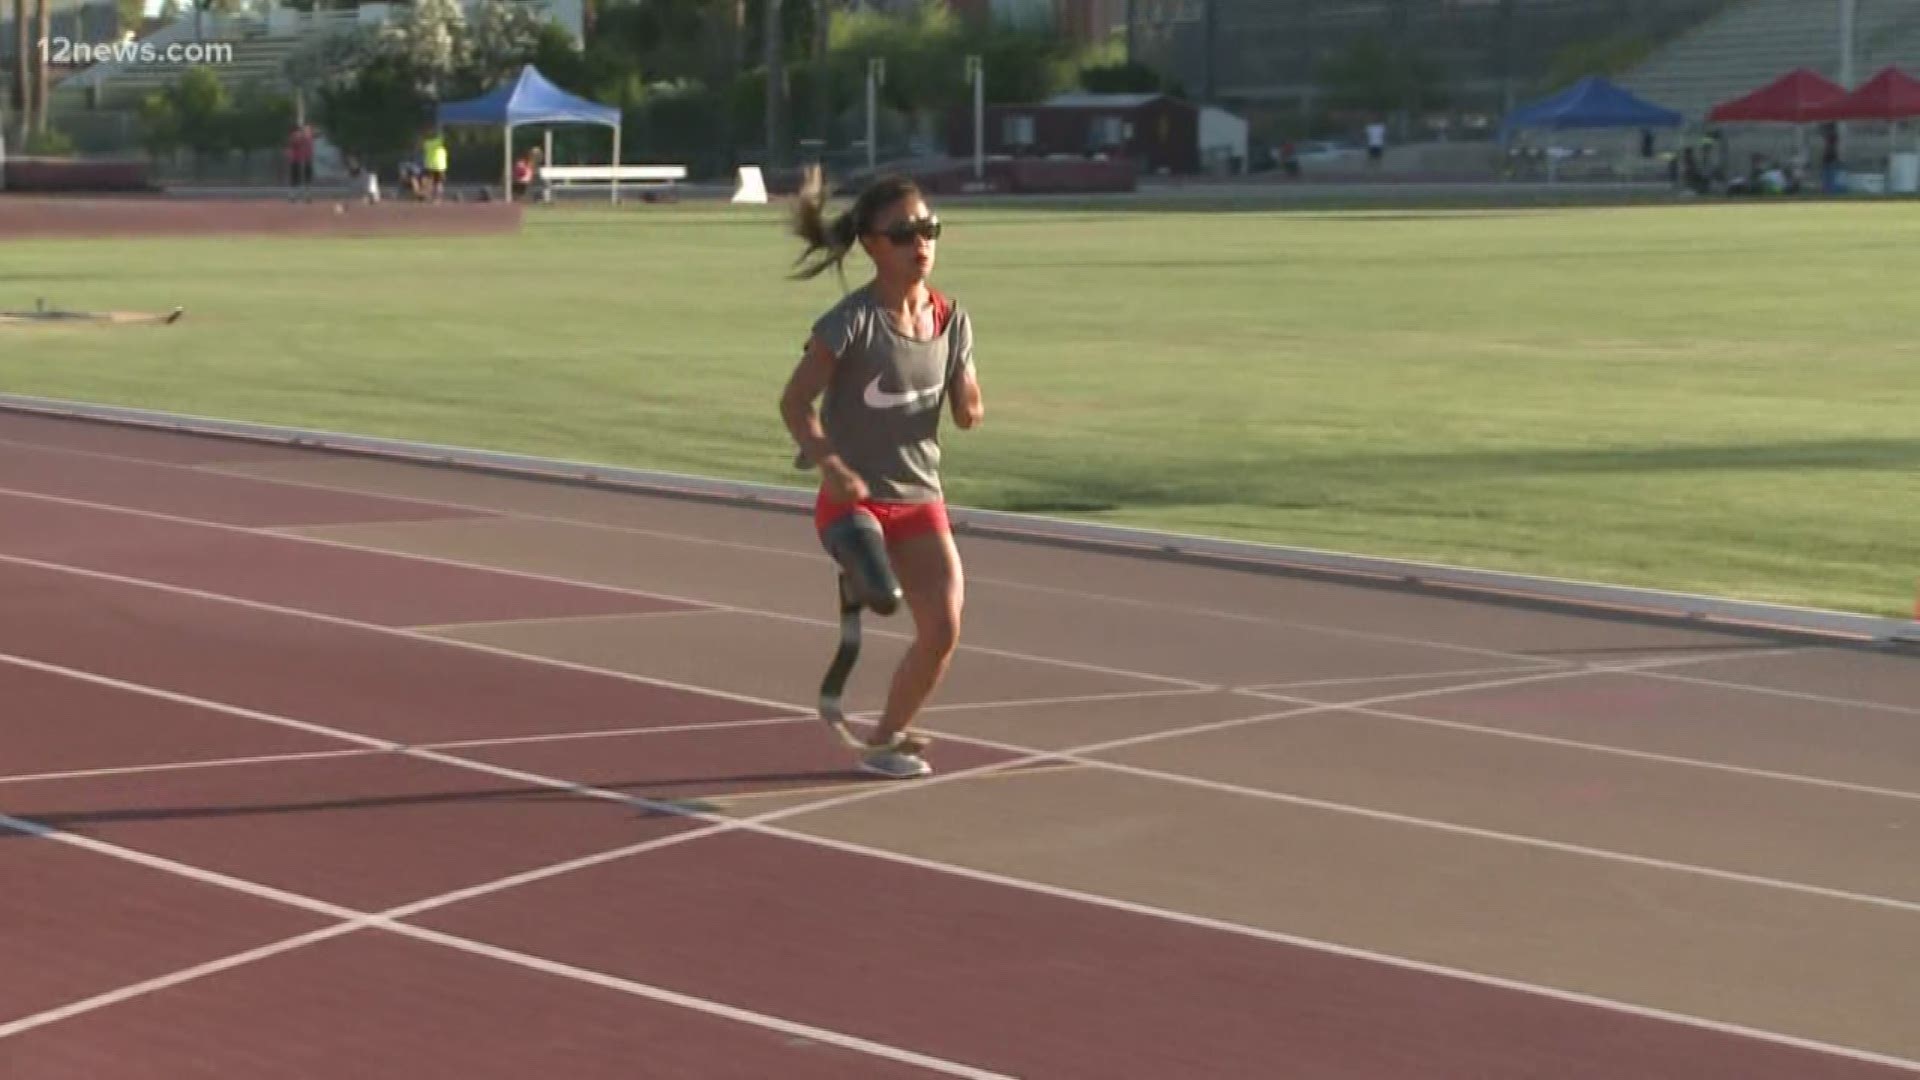 The Desert Challenge Games kicks off Wednesday in Tempe. More than 400 athletes from 17 different countries will be here to take part in the event hosted by Arizona Disabled Sports.